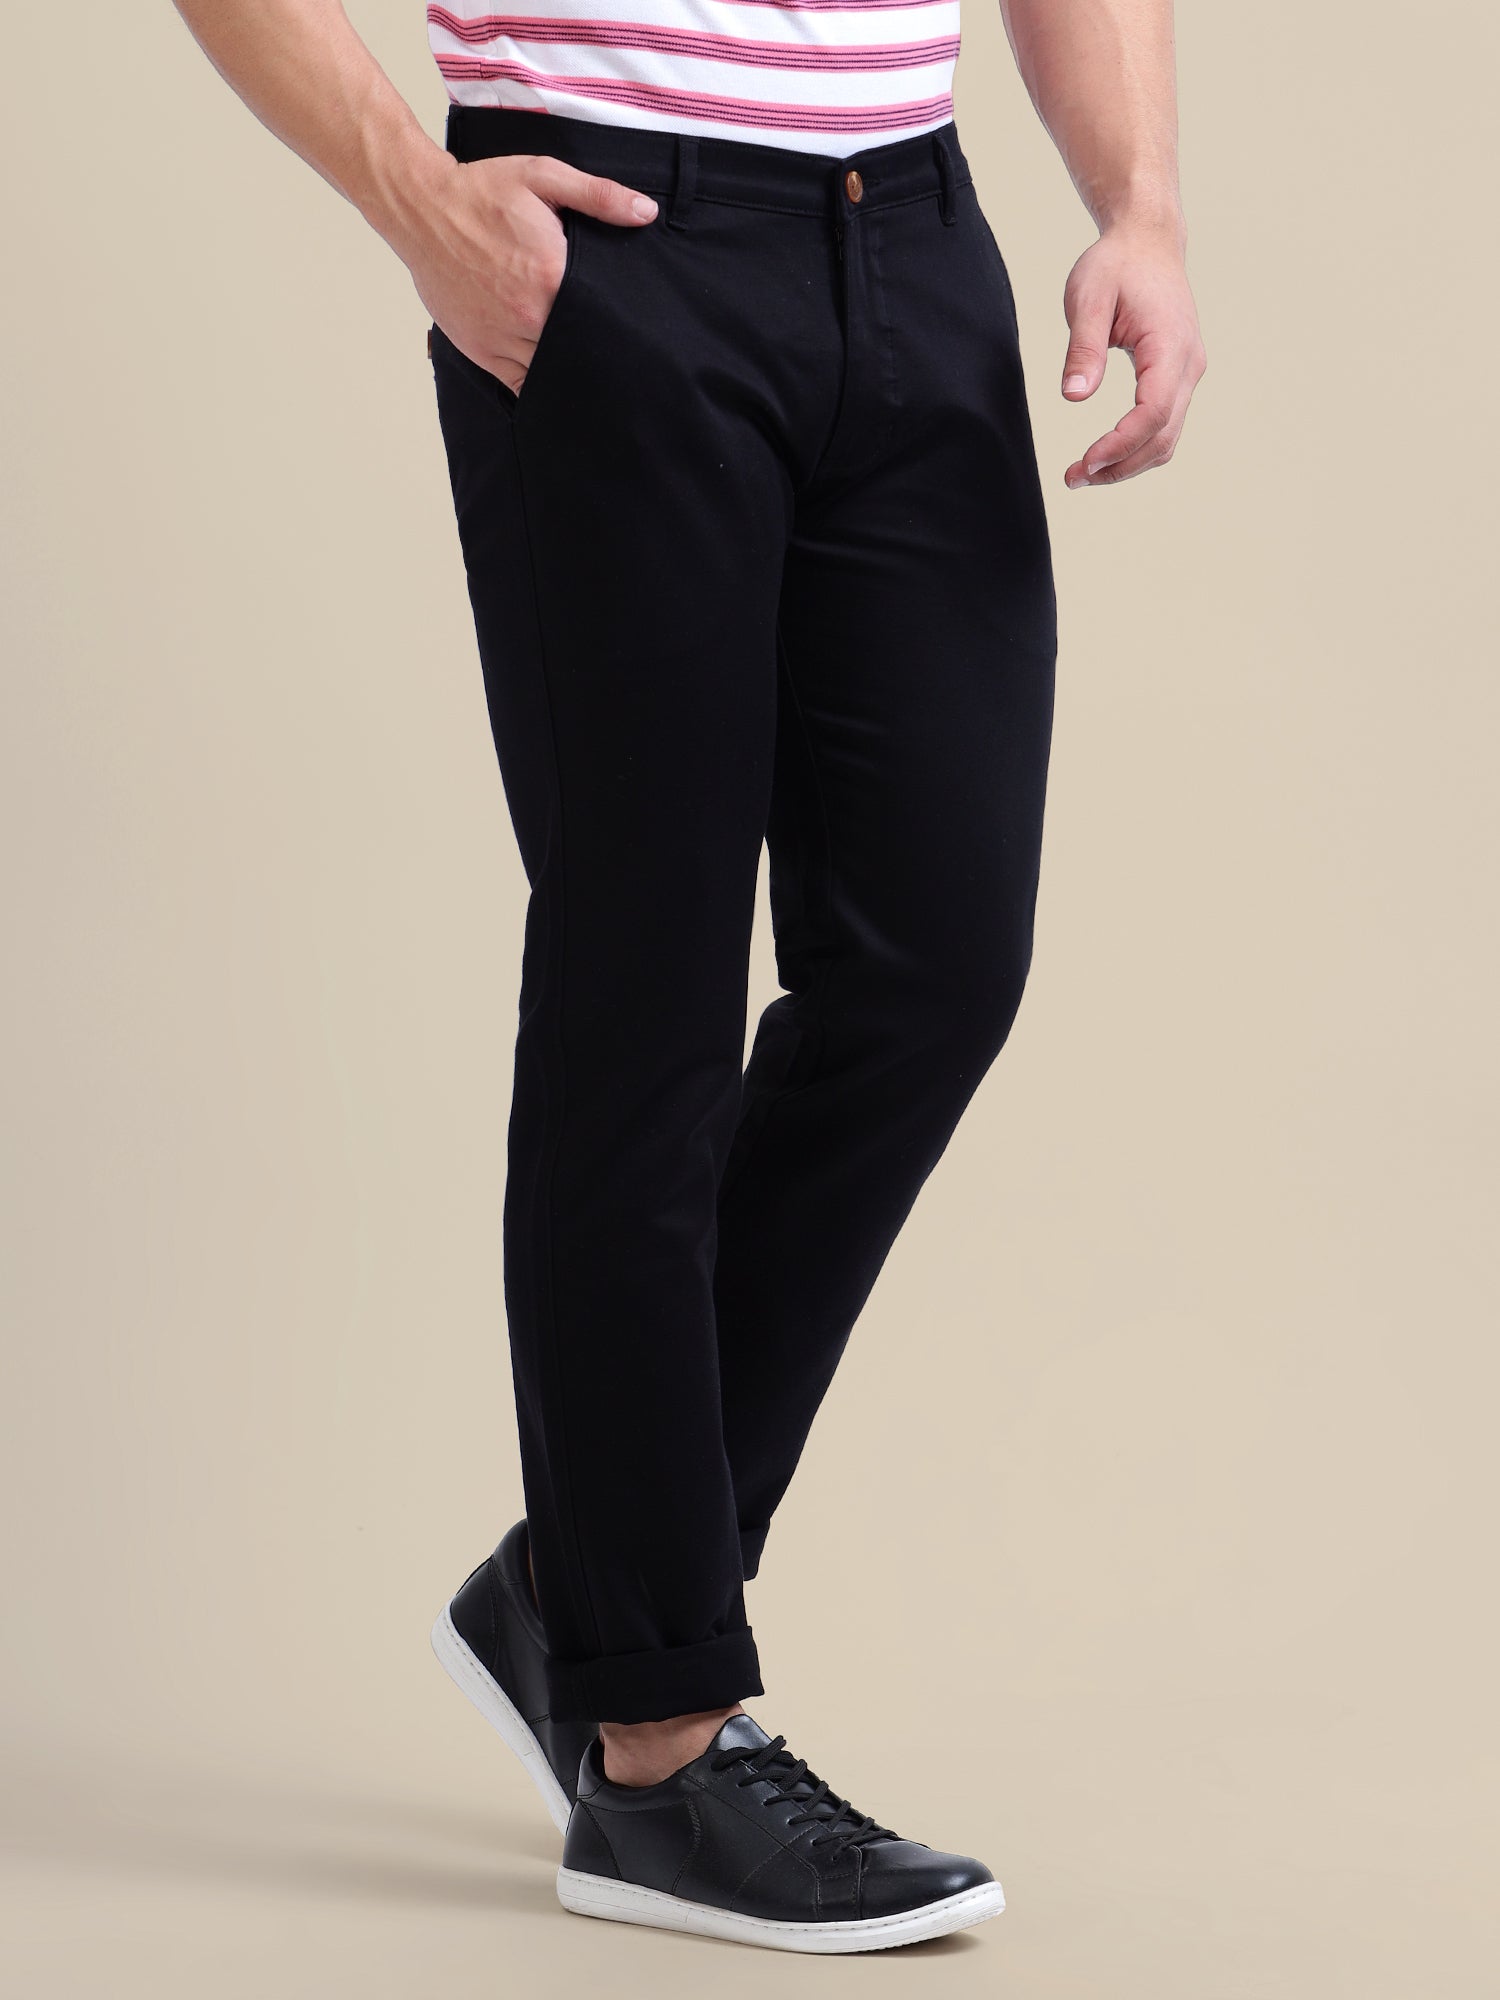 Black Casual Trousers Solid Cotton Lycra, Smart Fit